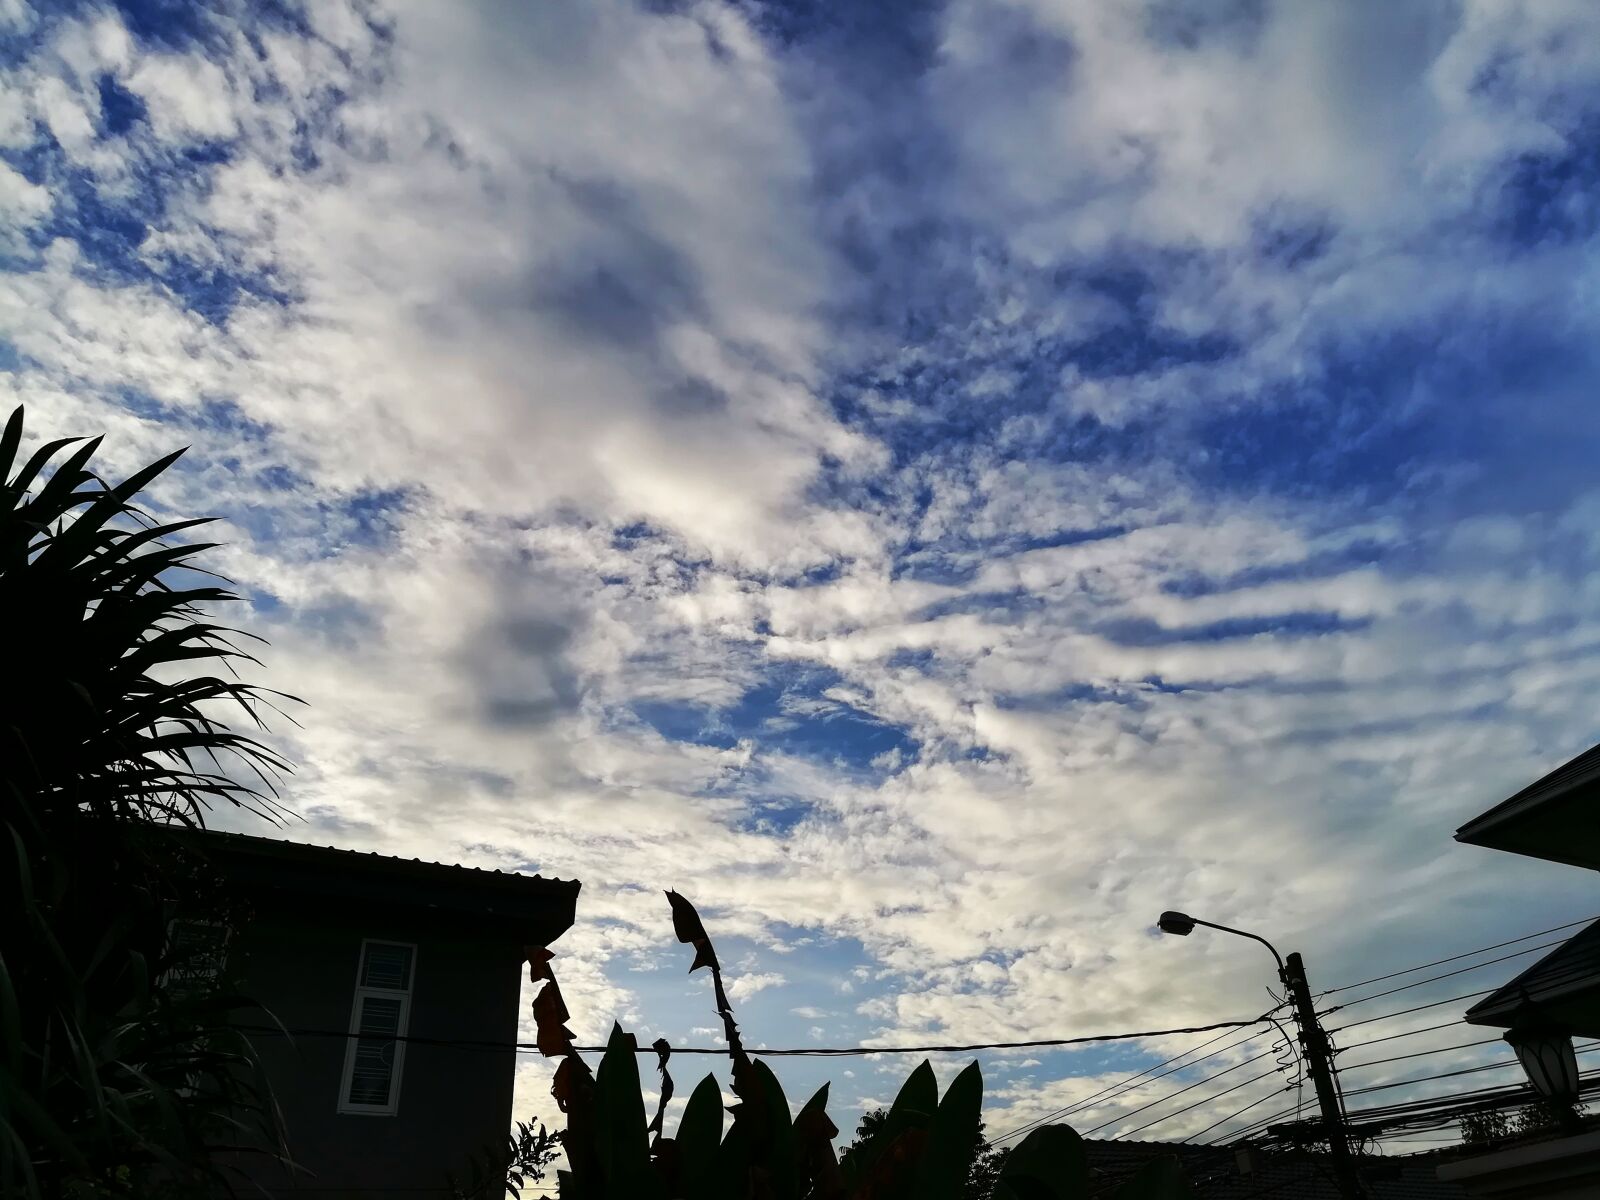 HUAWEI GR5 2017 sample photo. Sky, morning, nature photography